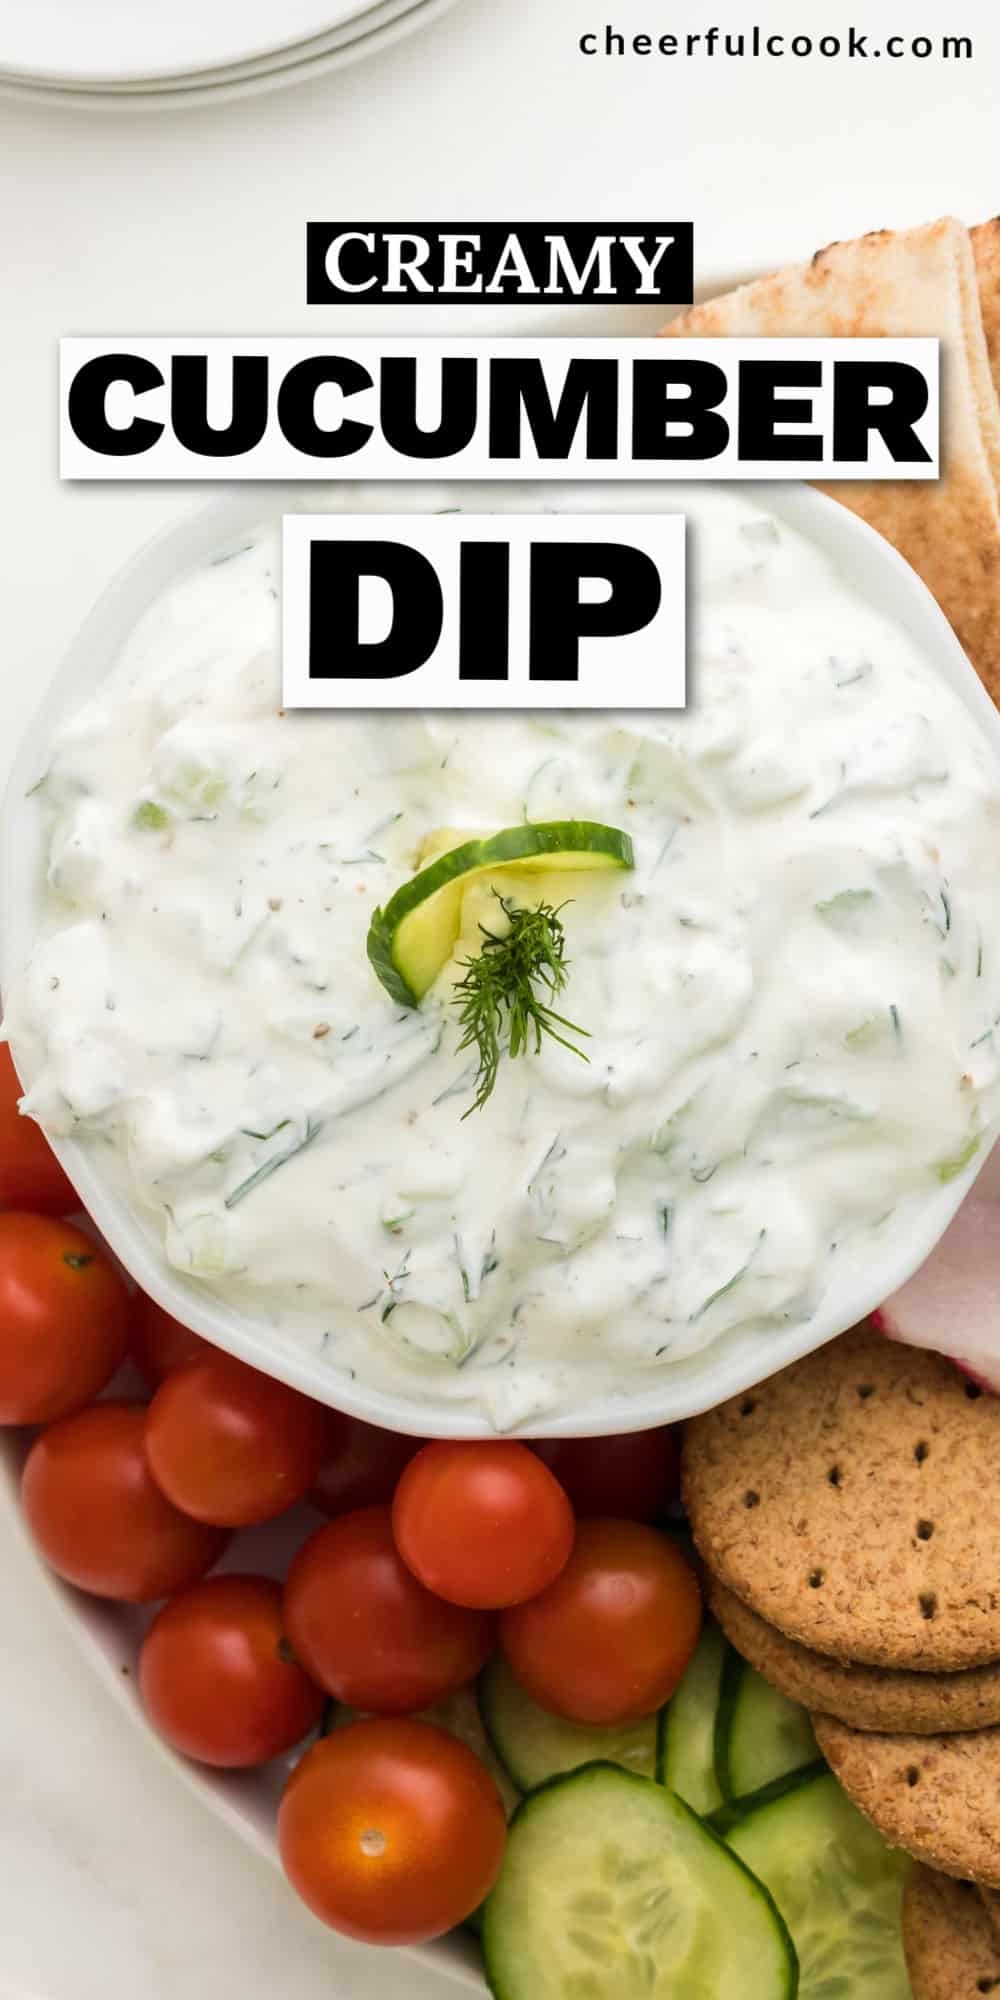 For this Cucumber Dip, we use a few staple ingredients from your fridge and pantry. We'll a couple of fresh herbs and turn it into an amazingly smooth and creamy dip. One that's perfect for veggies, pita bread, and crackers. #cheerfulcook #cucumberdip #veggiedip #recipe #easy via @cheerfulcook